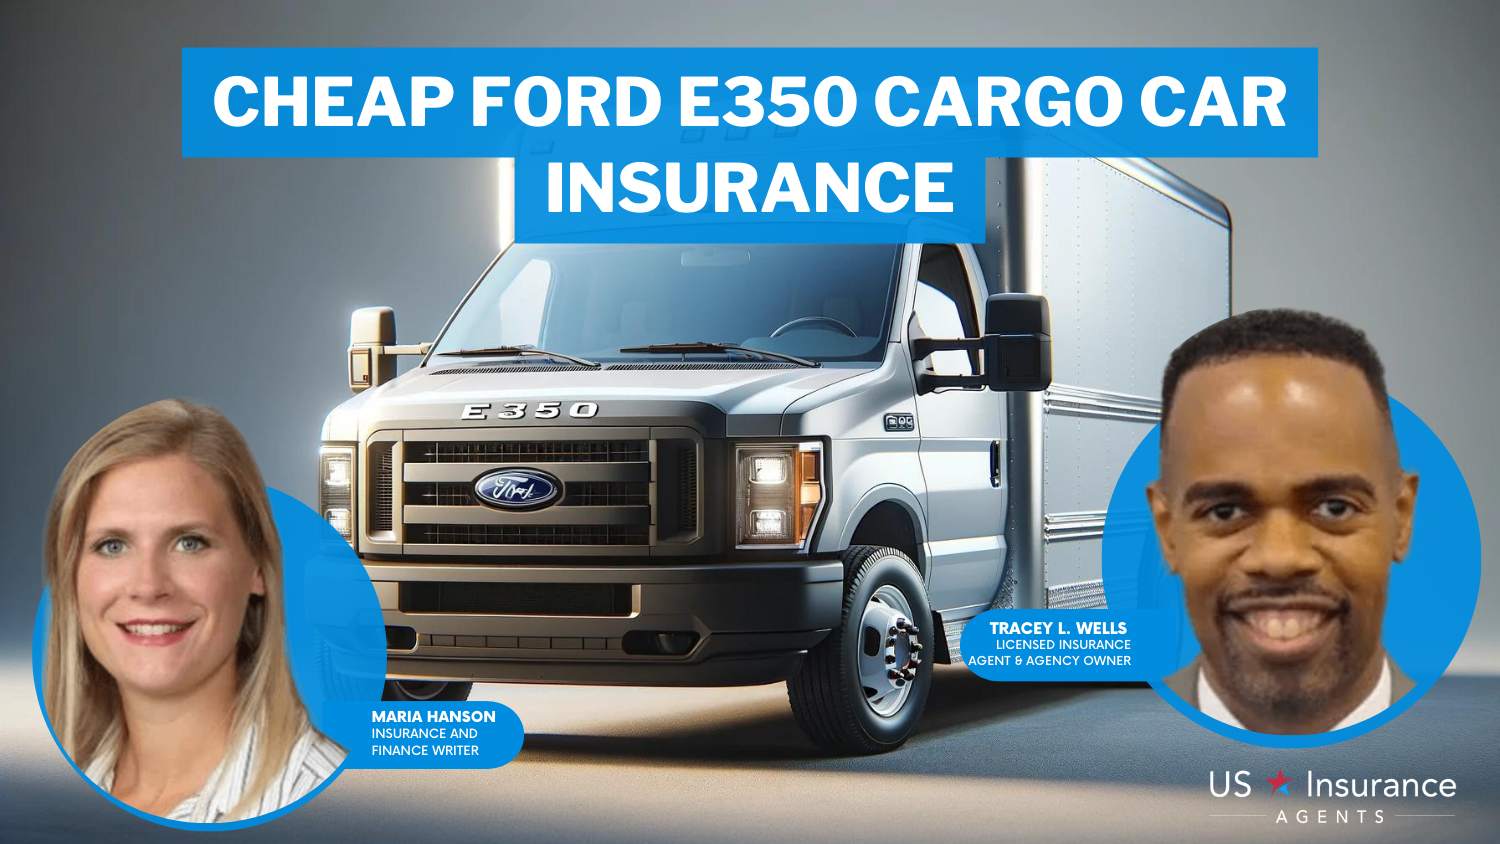 Cheap Ford E350 Cargo Car Insurance: Auto-Owners, Erie, and Nationwide